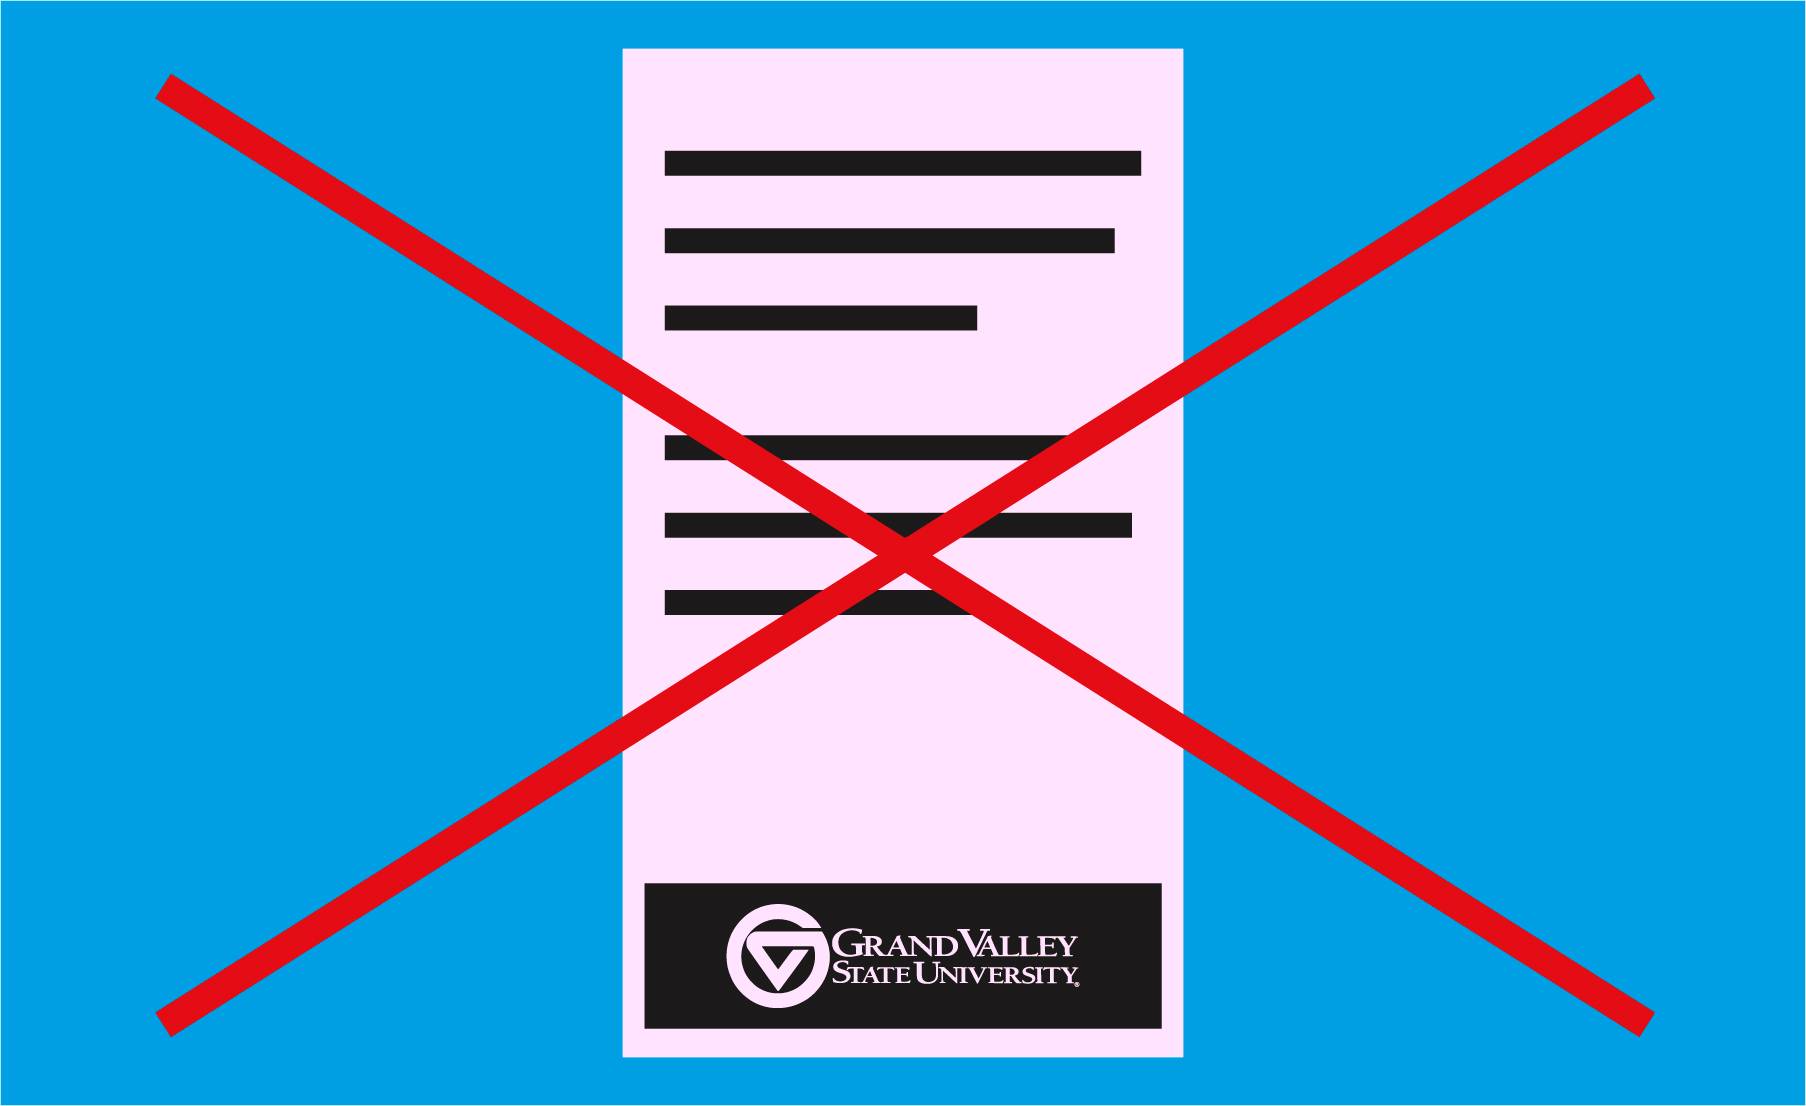 A Grand Valley logo on the front of a pink-colored-paper brochure. The logo is reversed out of a black rectangle, making it the same color as the paper--pink. A red X overlays the image.